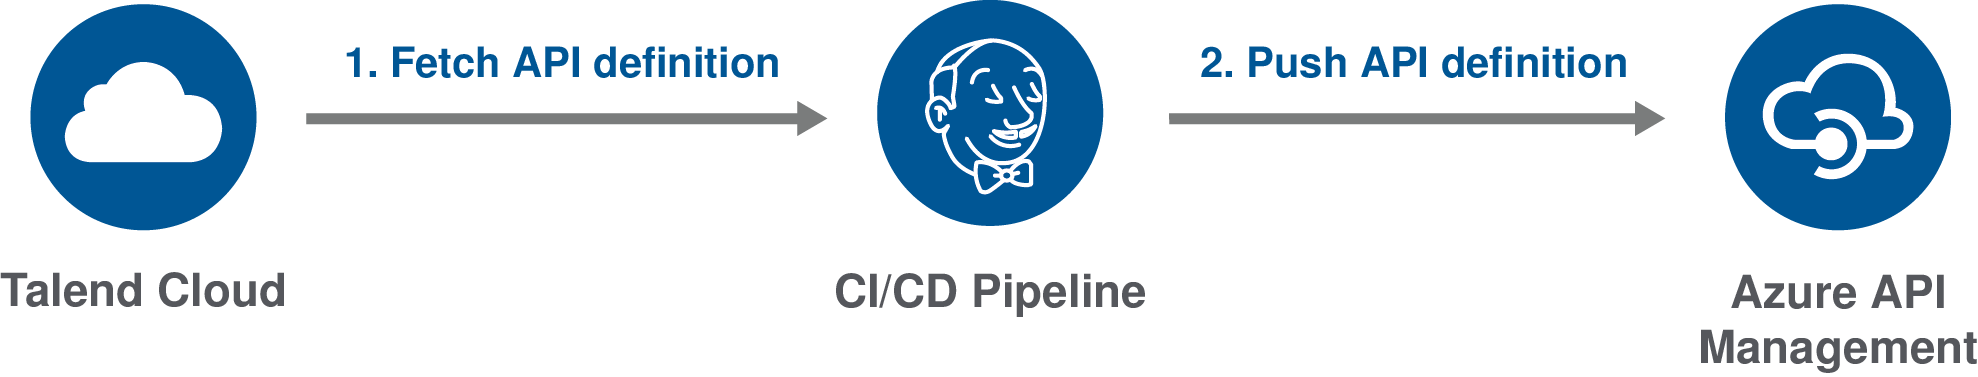 Diagram of the process where the API definition is fetched by the CI/CD pipeline from Talend Cloud and then pushed to Azure API Management.